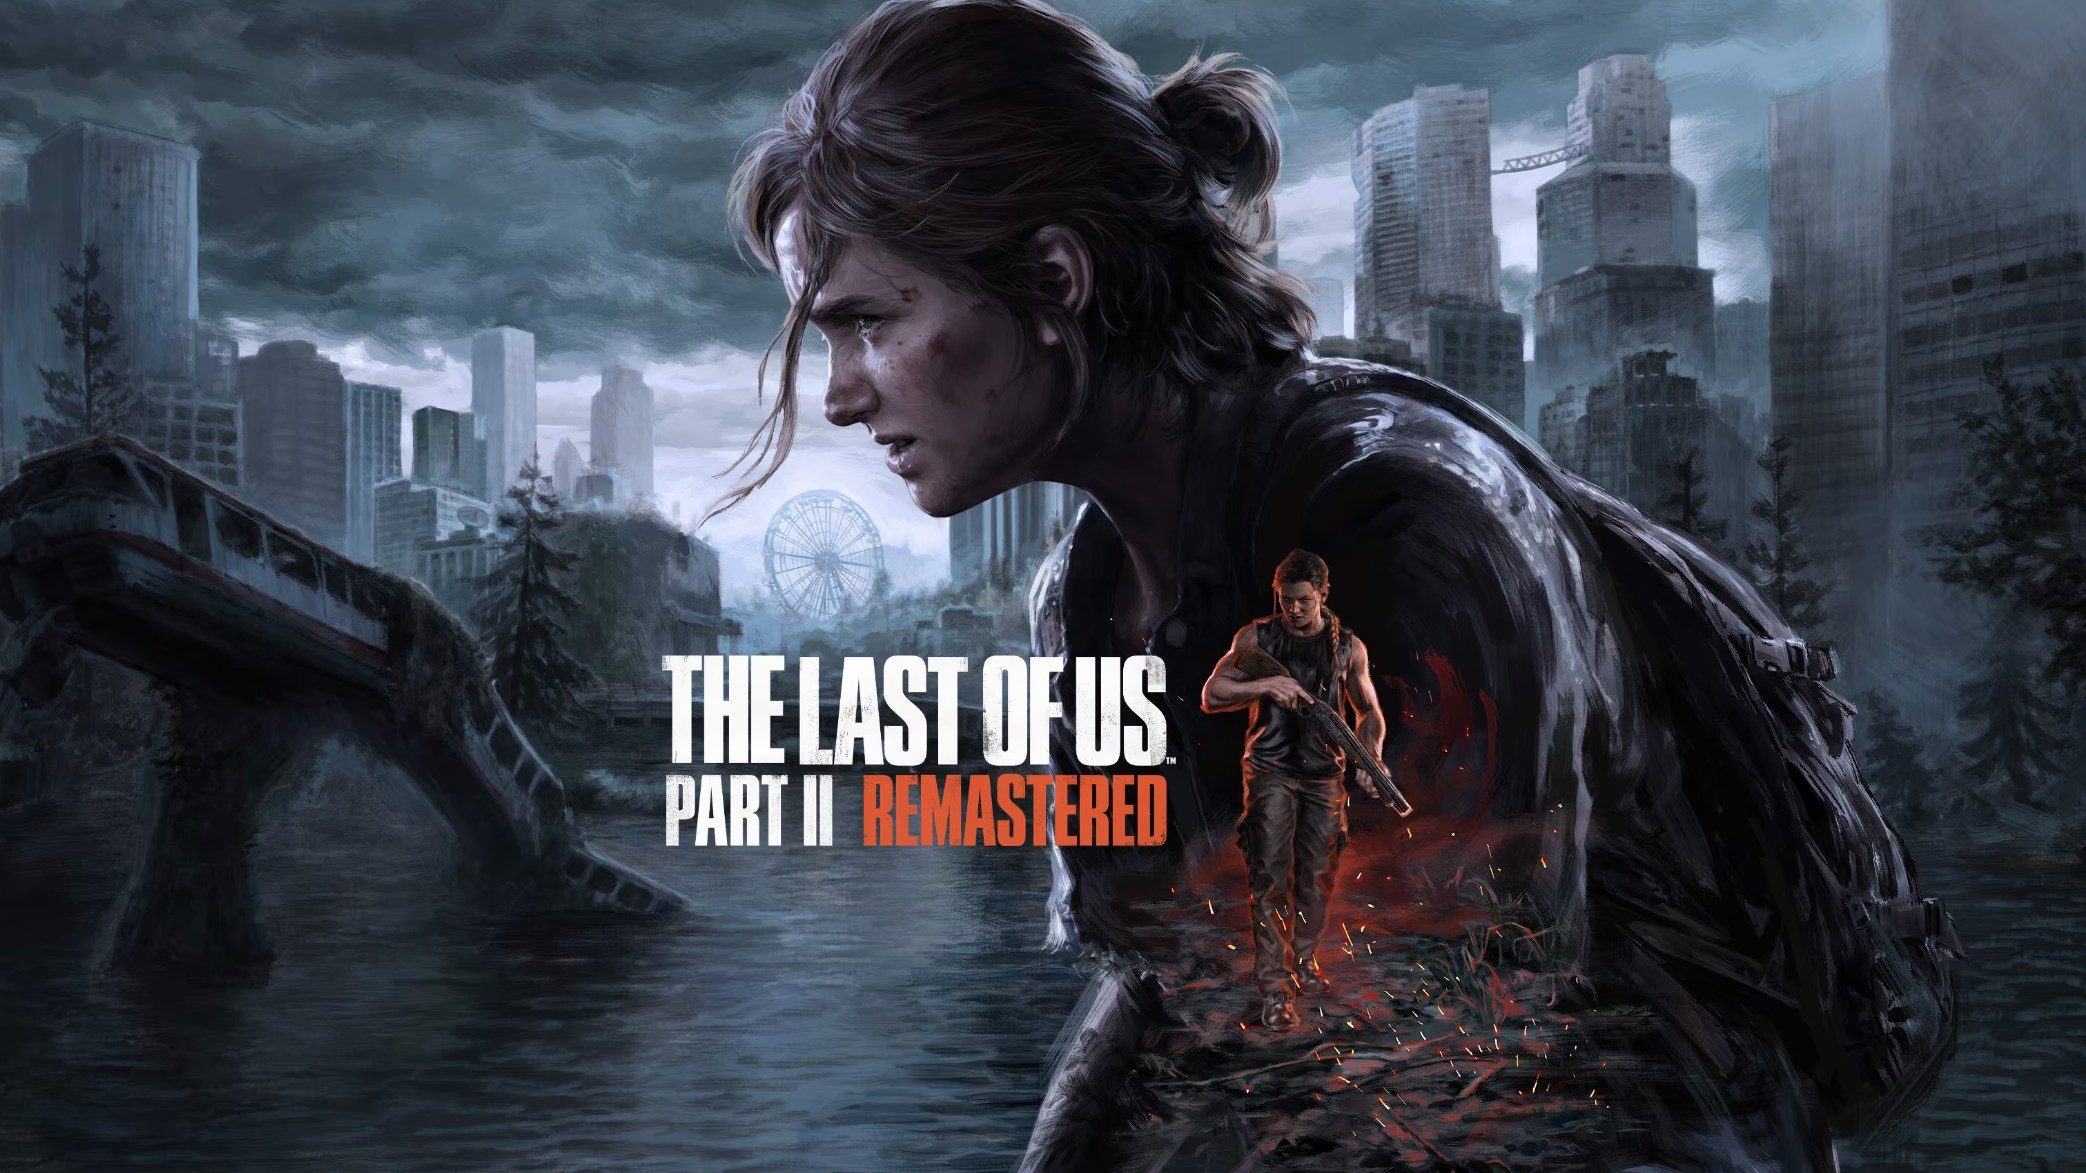 ‘The Last of Us 2 Remastered’ review: A fair enough deal as a $10 upgrade